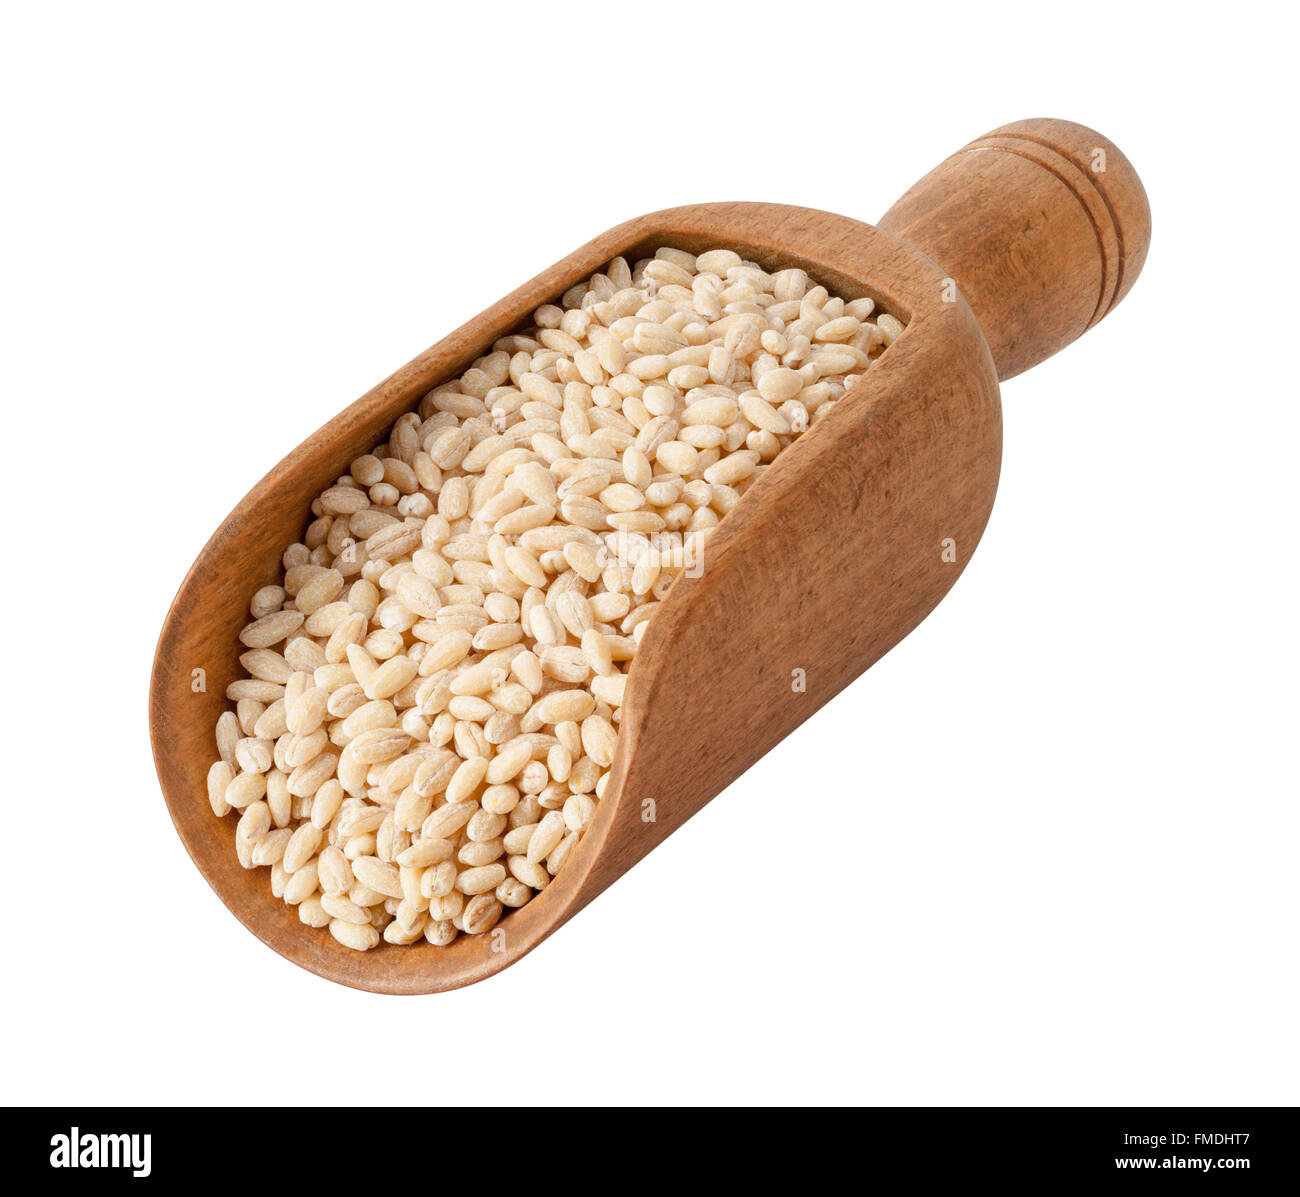 Uncooked Natural Pearled Barley in a Wood Scoop. The image is a cut out, isolated on a white background. Stock Photo